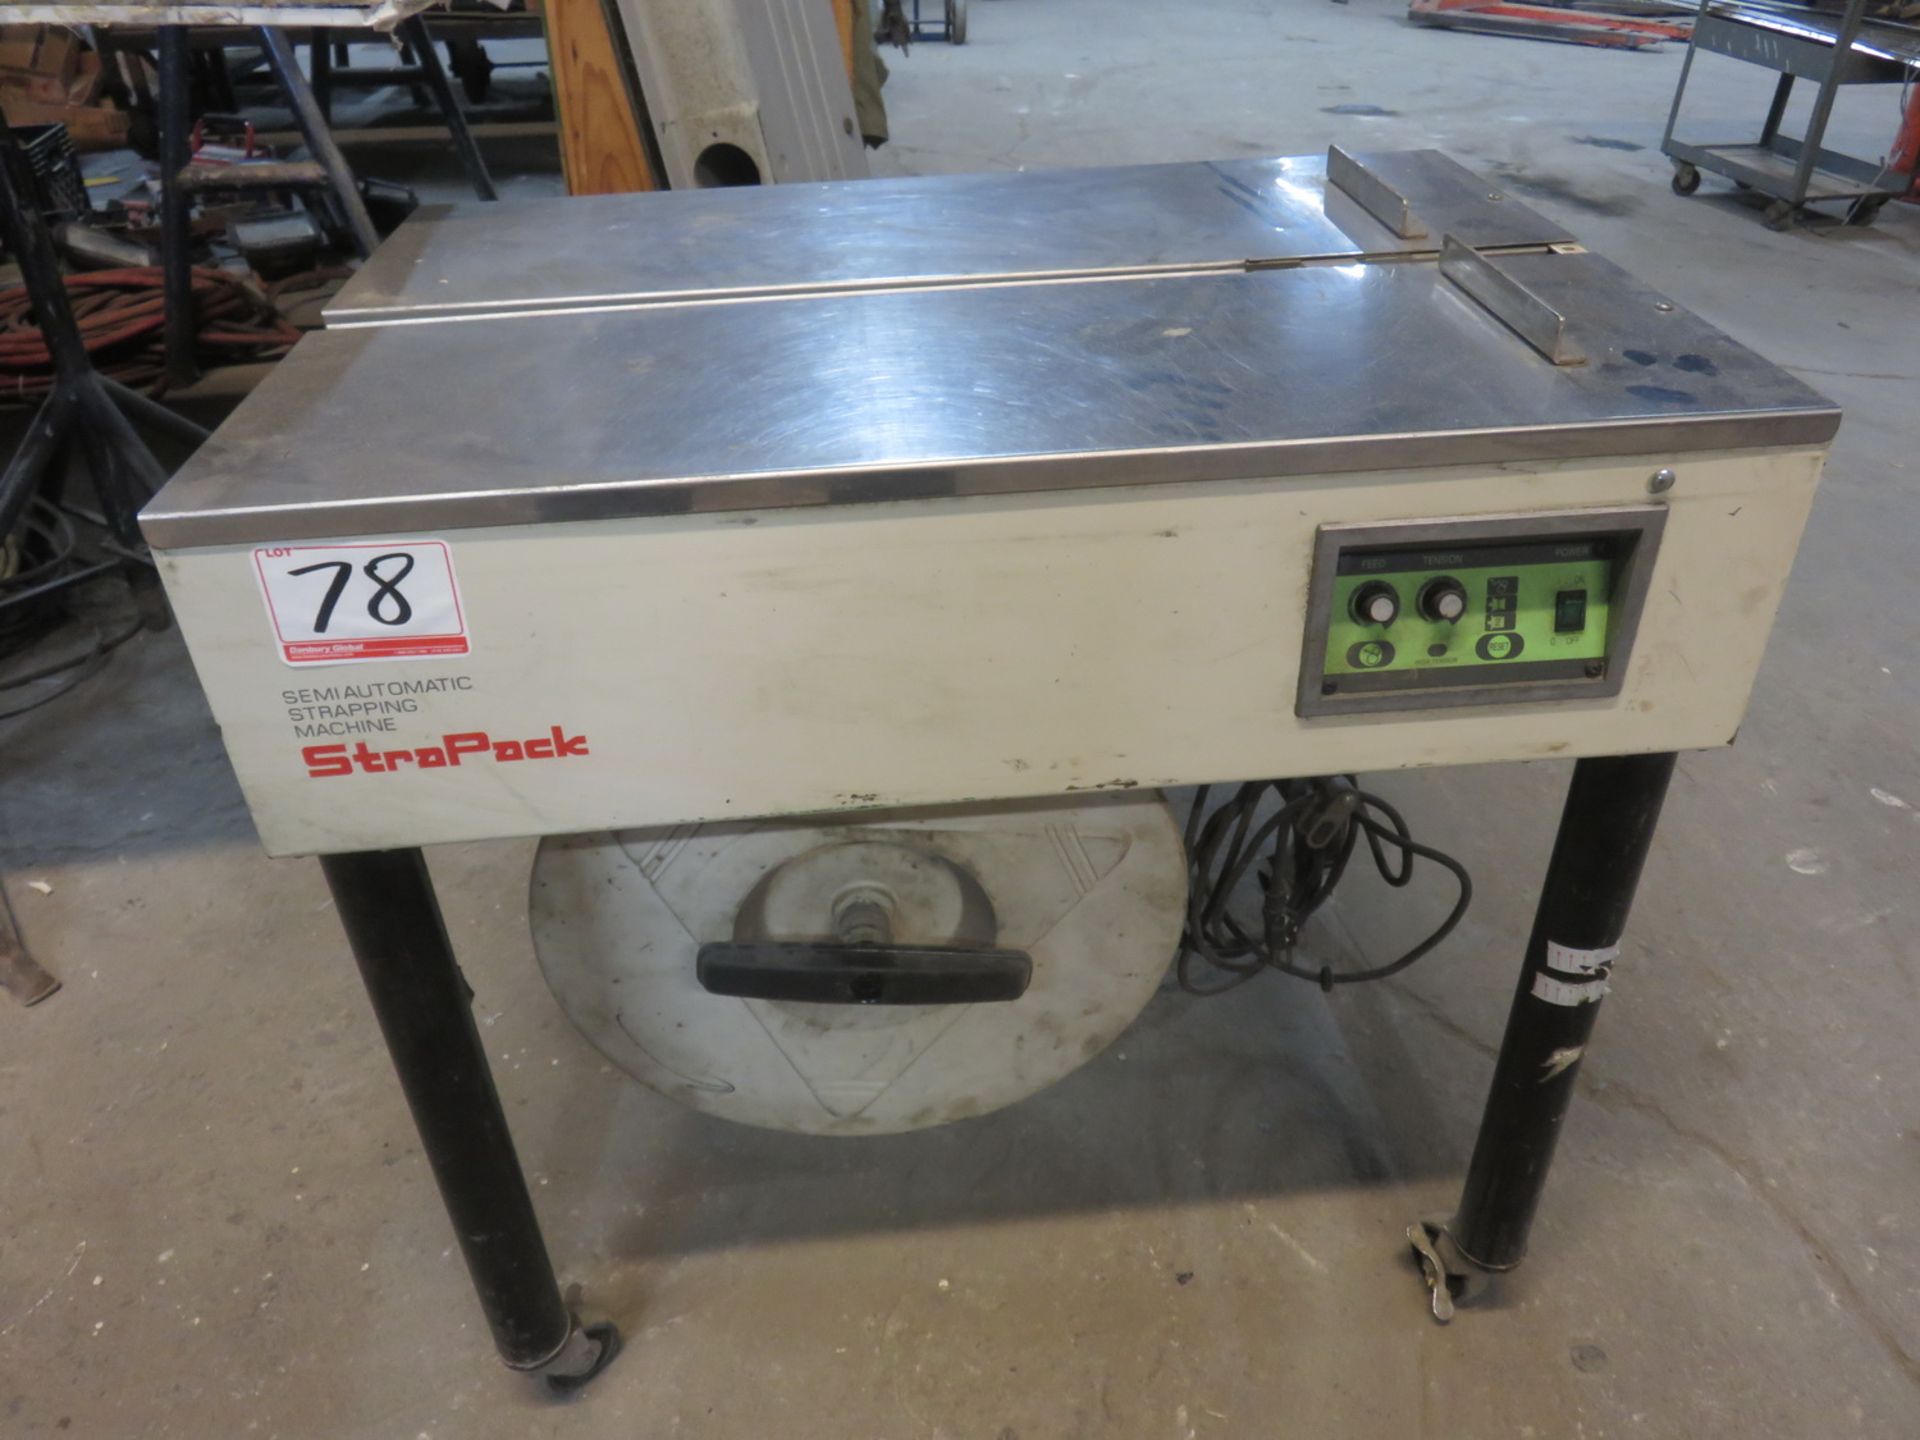 STROPACK MOD D-52, 110V SEMI-AUTOMATIC STRAPPING MACHINE - S/N 21252-708